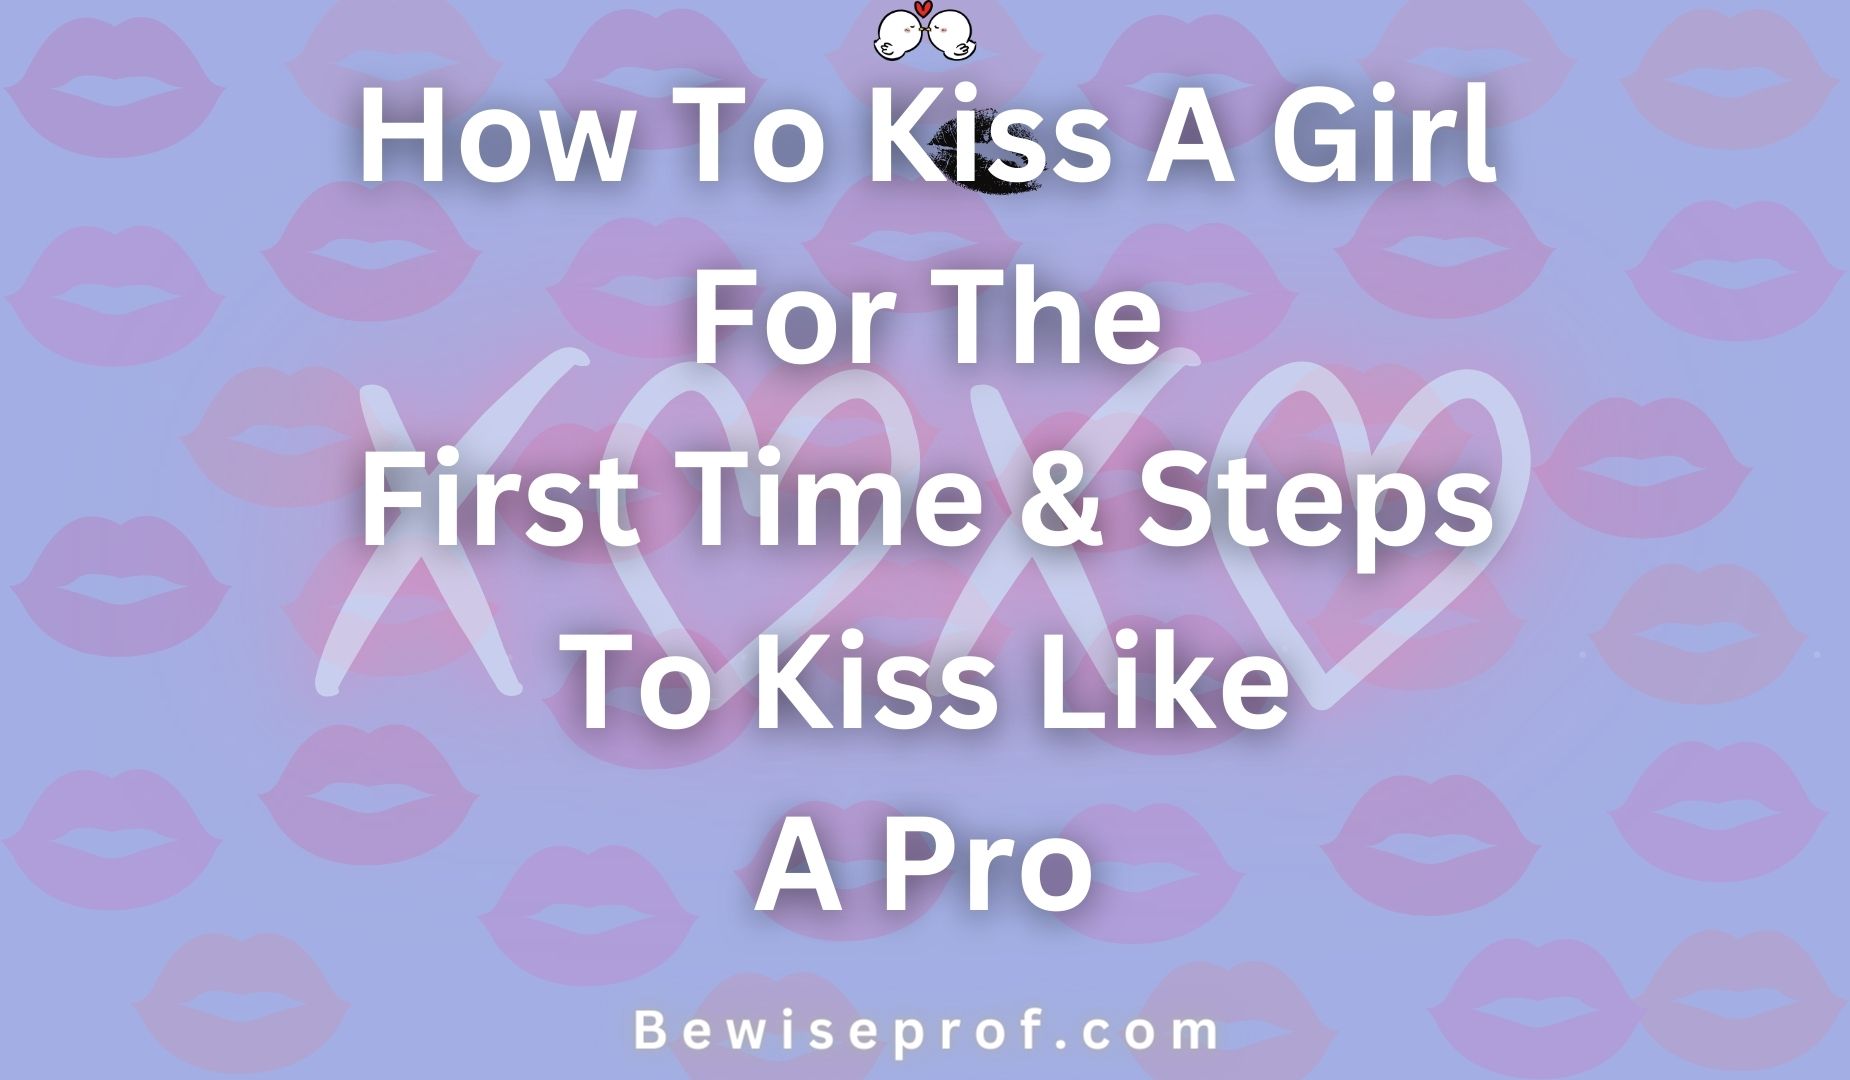 How To Kiss A Girl For The First Time & Steps To Kiss Like A Pro